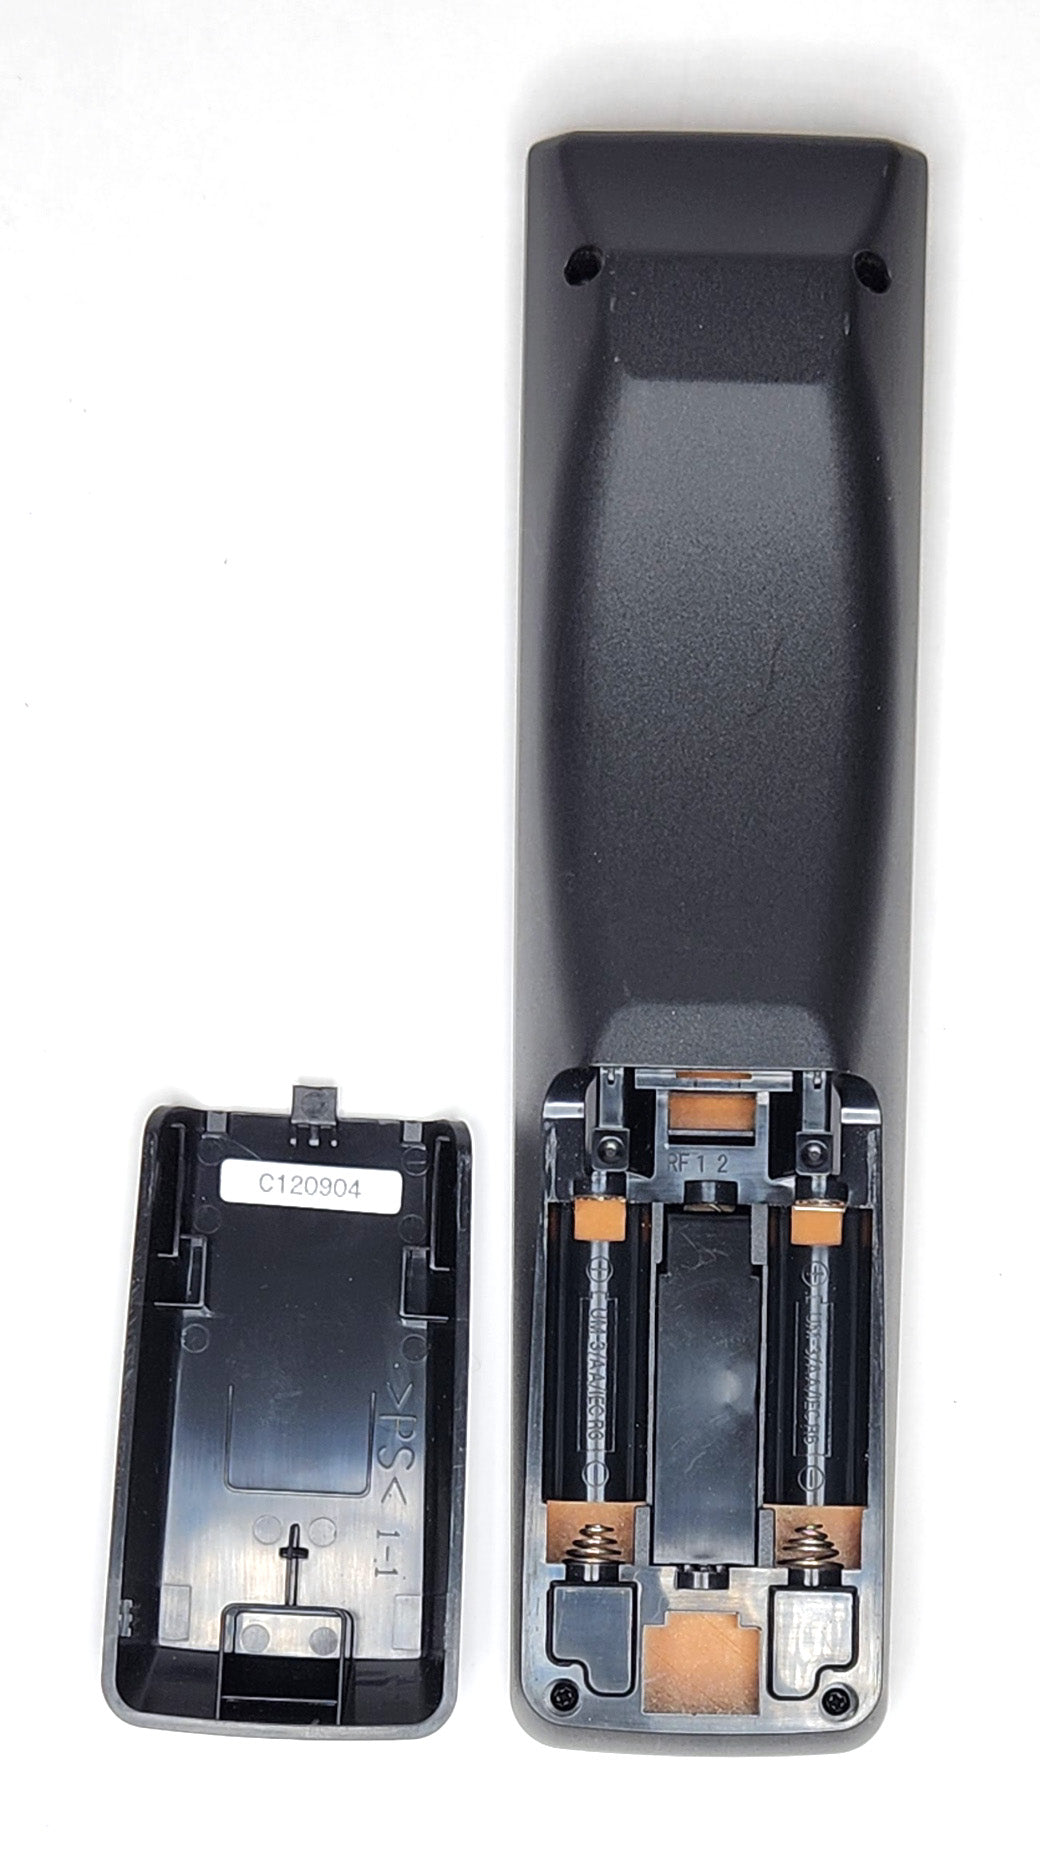 Denon RC-985 Remote Control for DVD Players - Battery Compartment